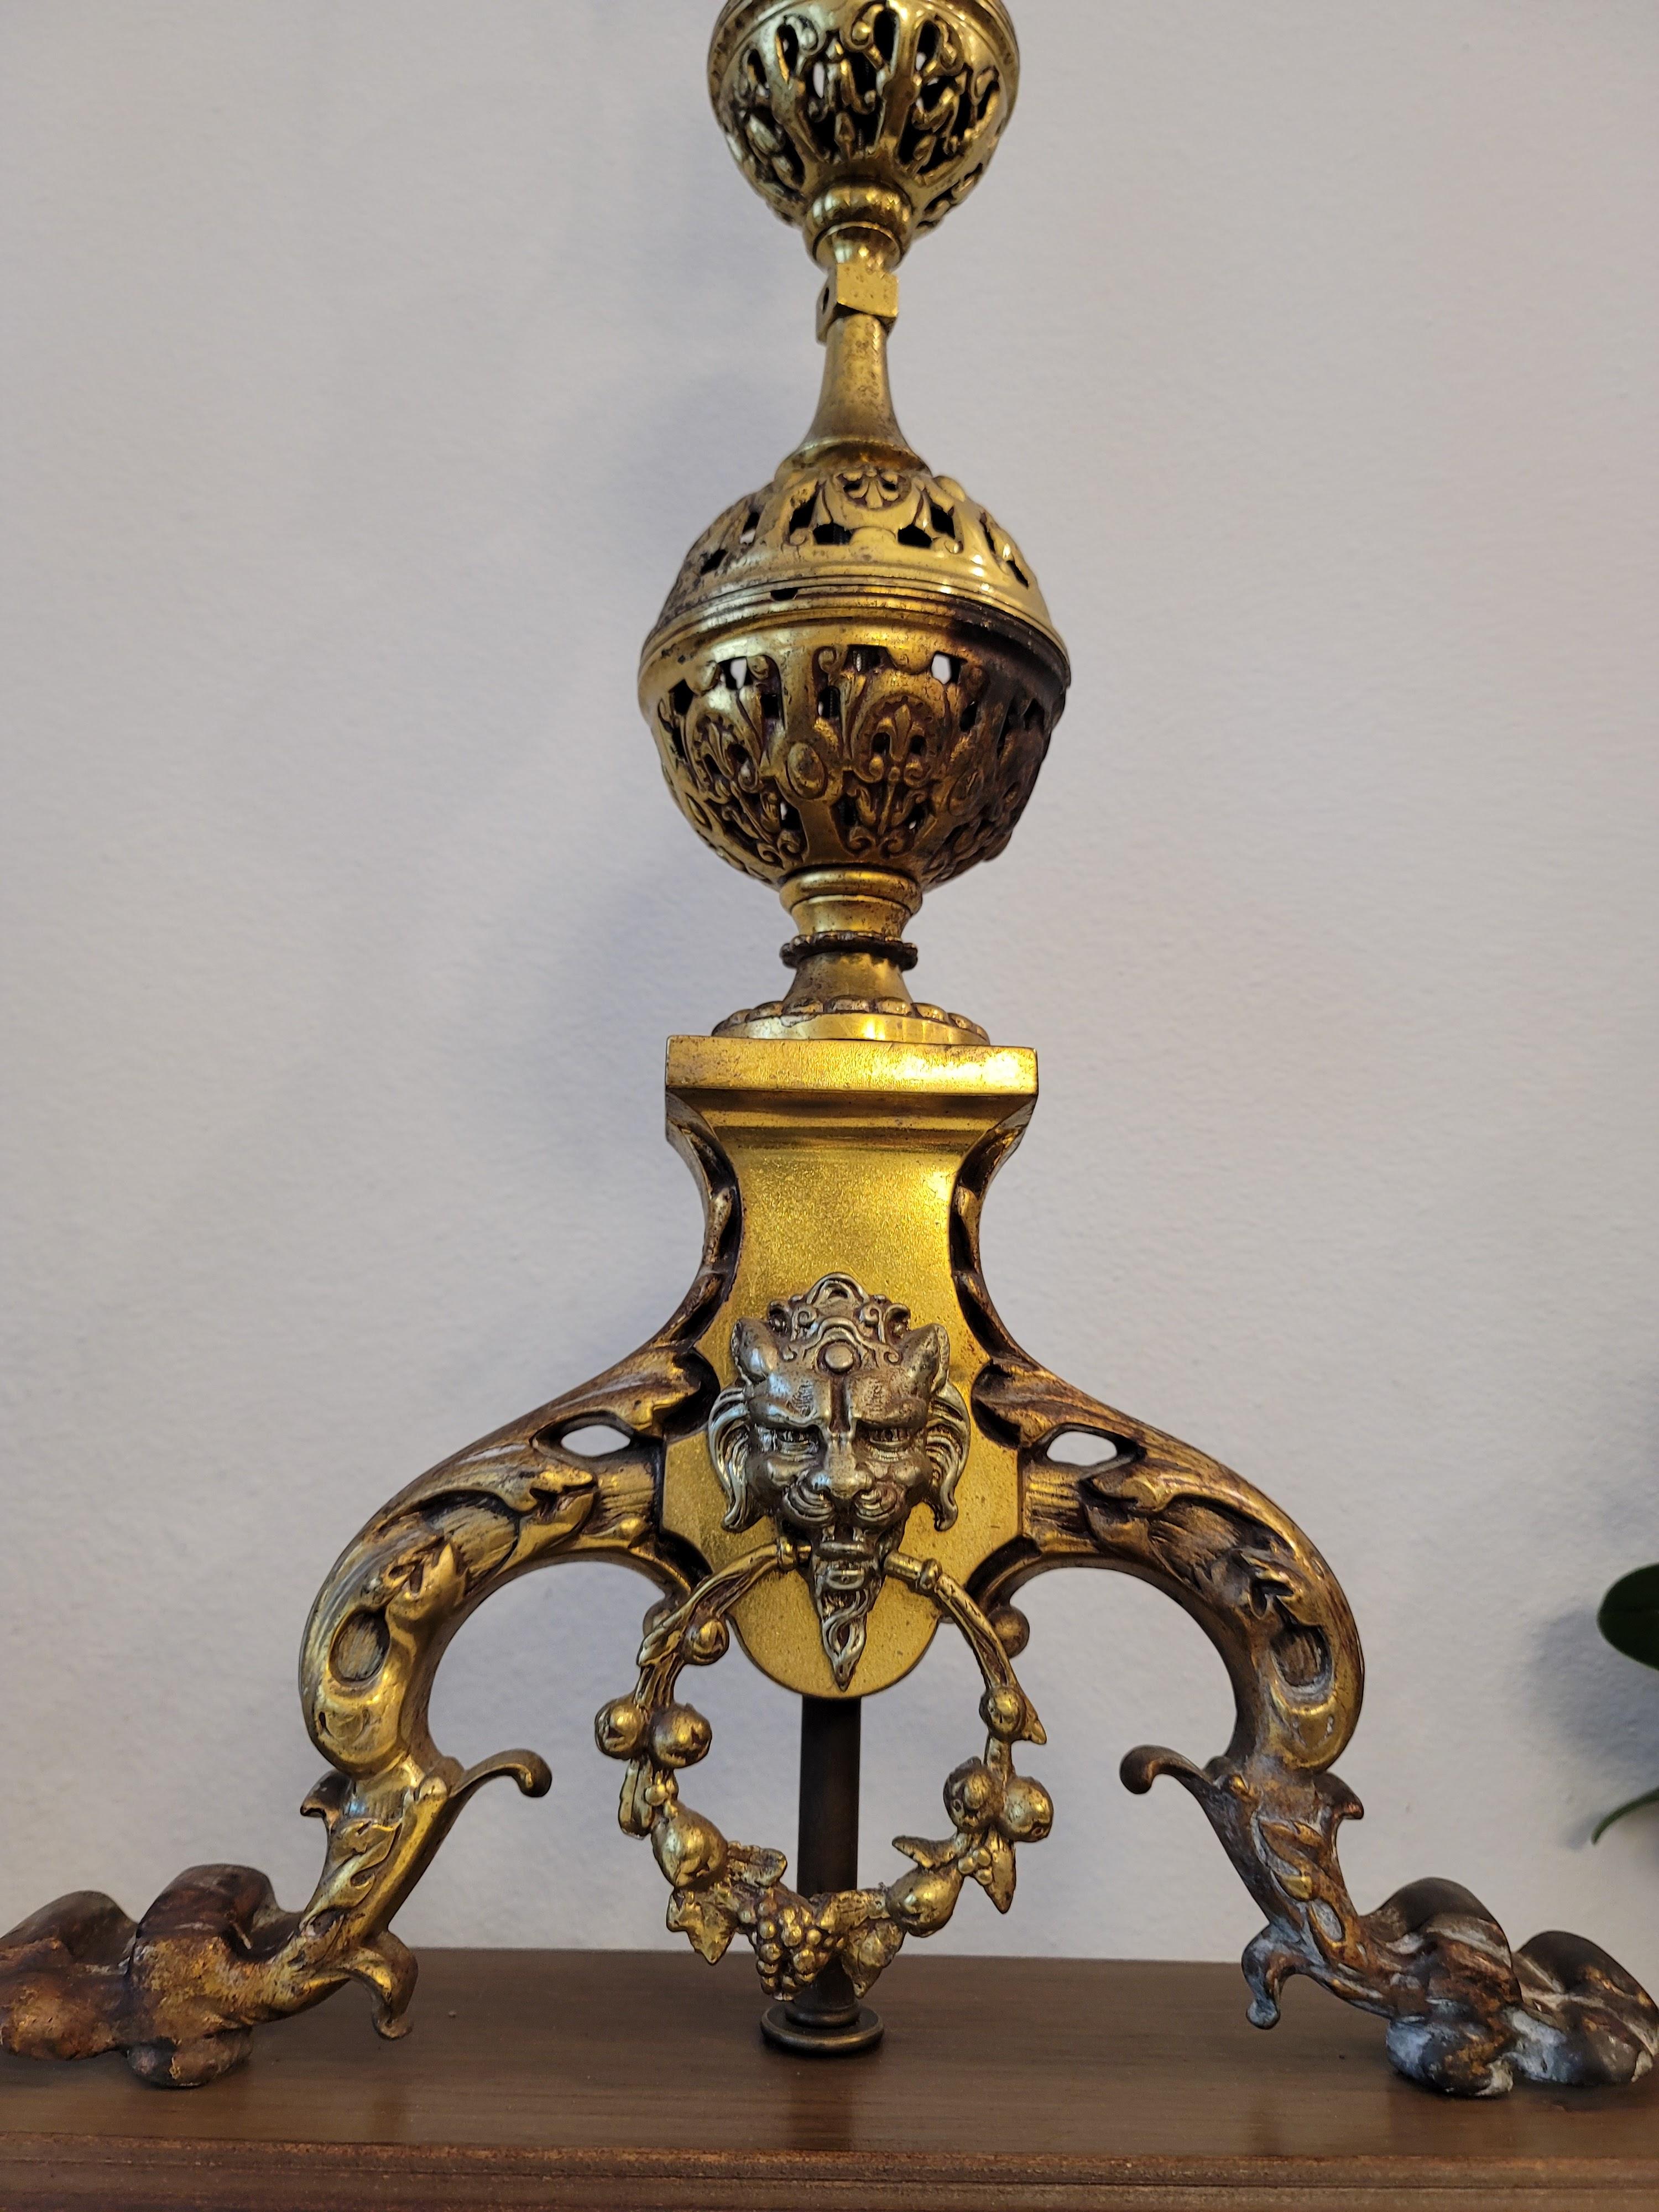 19th Century French Gothic Revival Andirons Mounted As Table Lamps - A Pair  For Sale 1